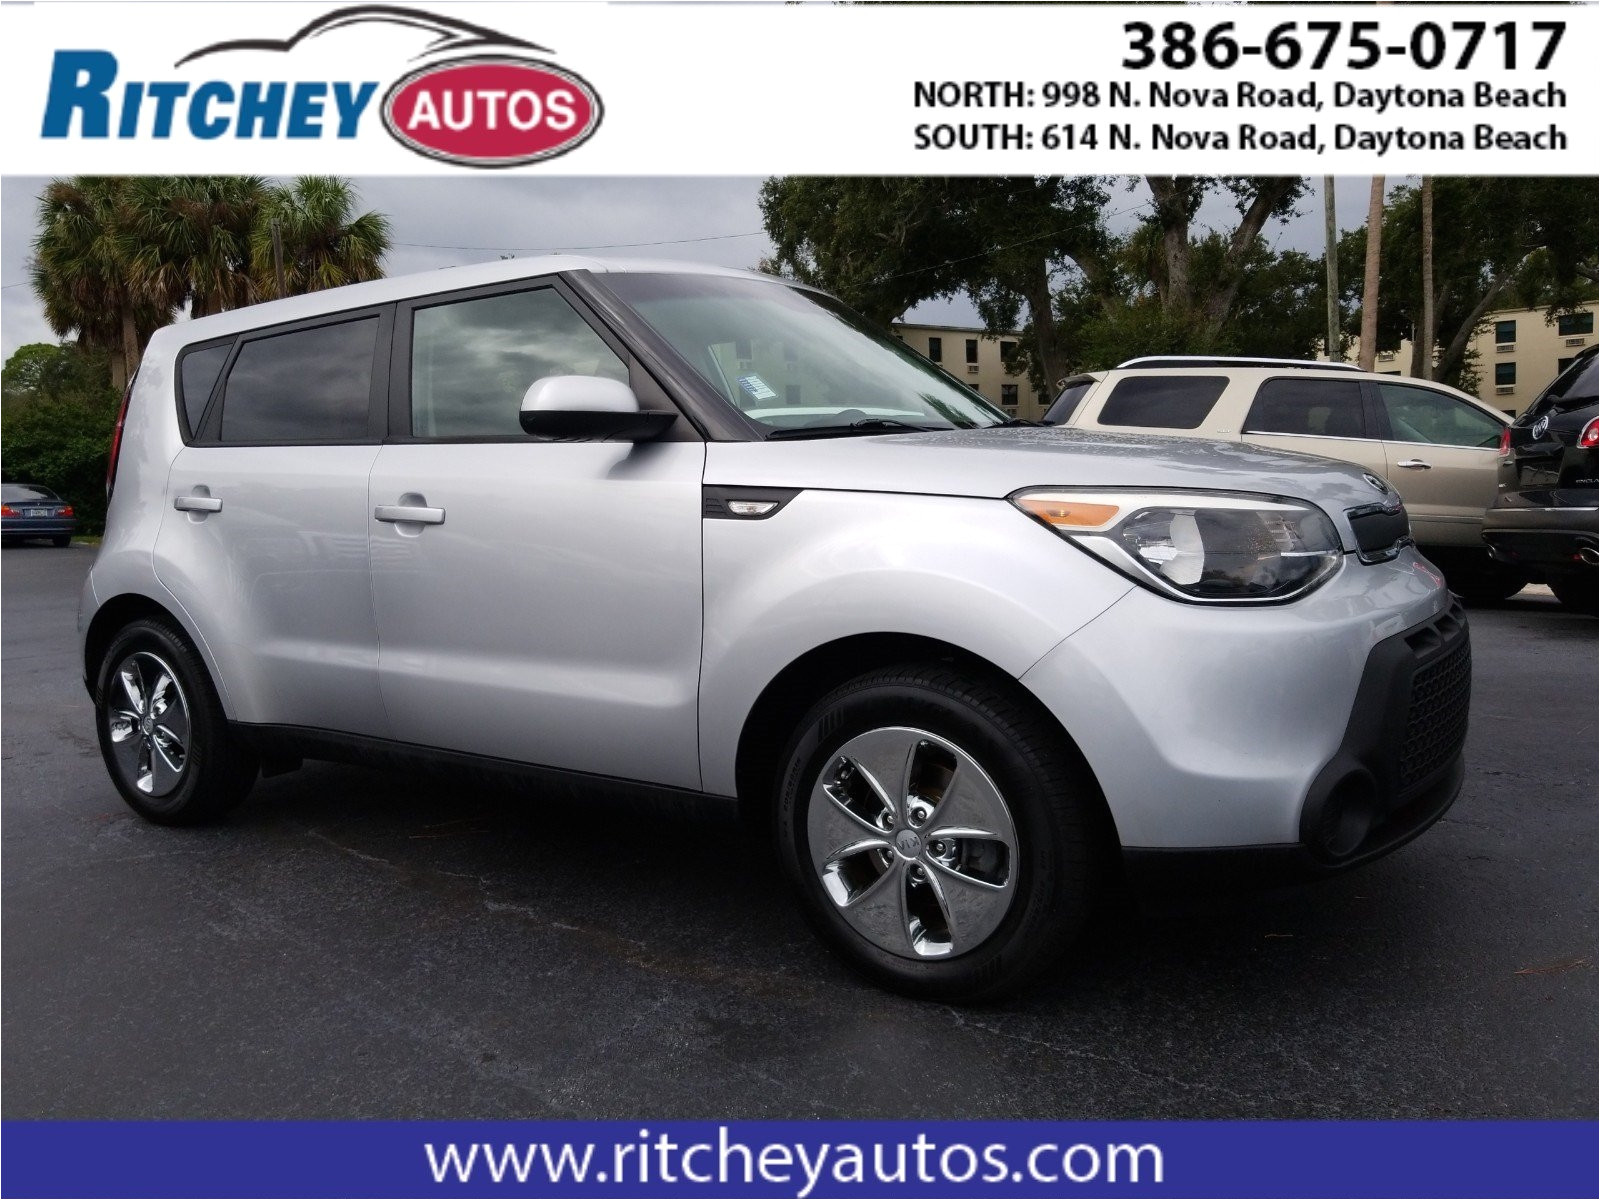 used vehicles between 1 001 and 10 000 for sale in daytona beach fl ritchey autos